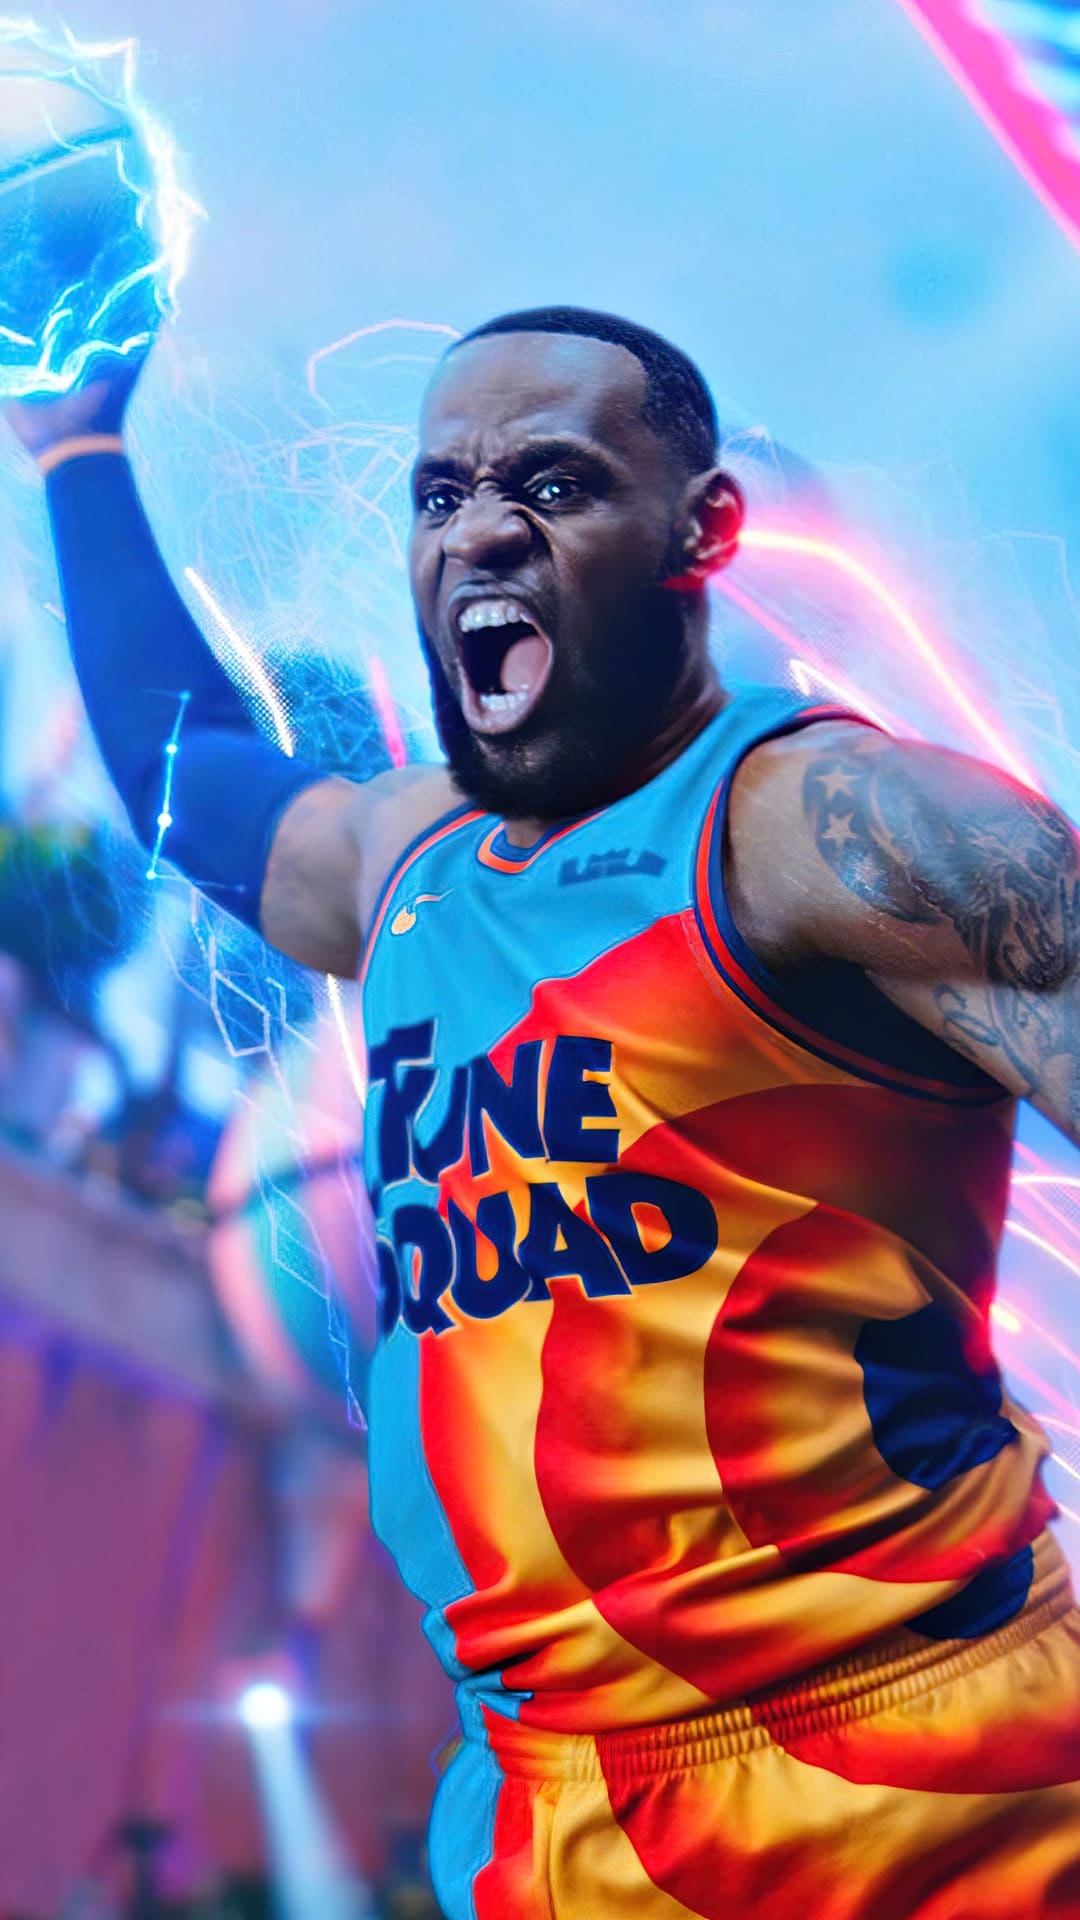 Space Jam: A New Legacy, Top 25 wallpapers, A new legacy begins, Amazing background images, 1080x1920 Full HD Phone